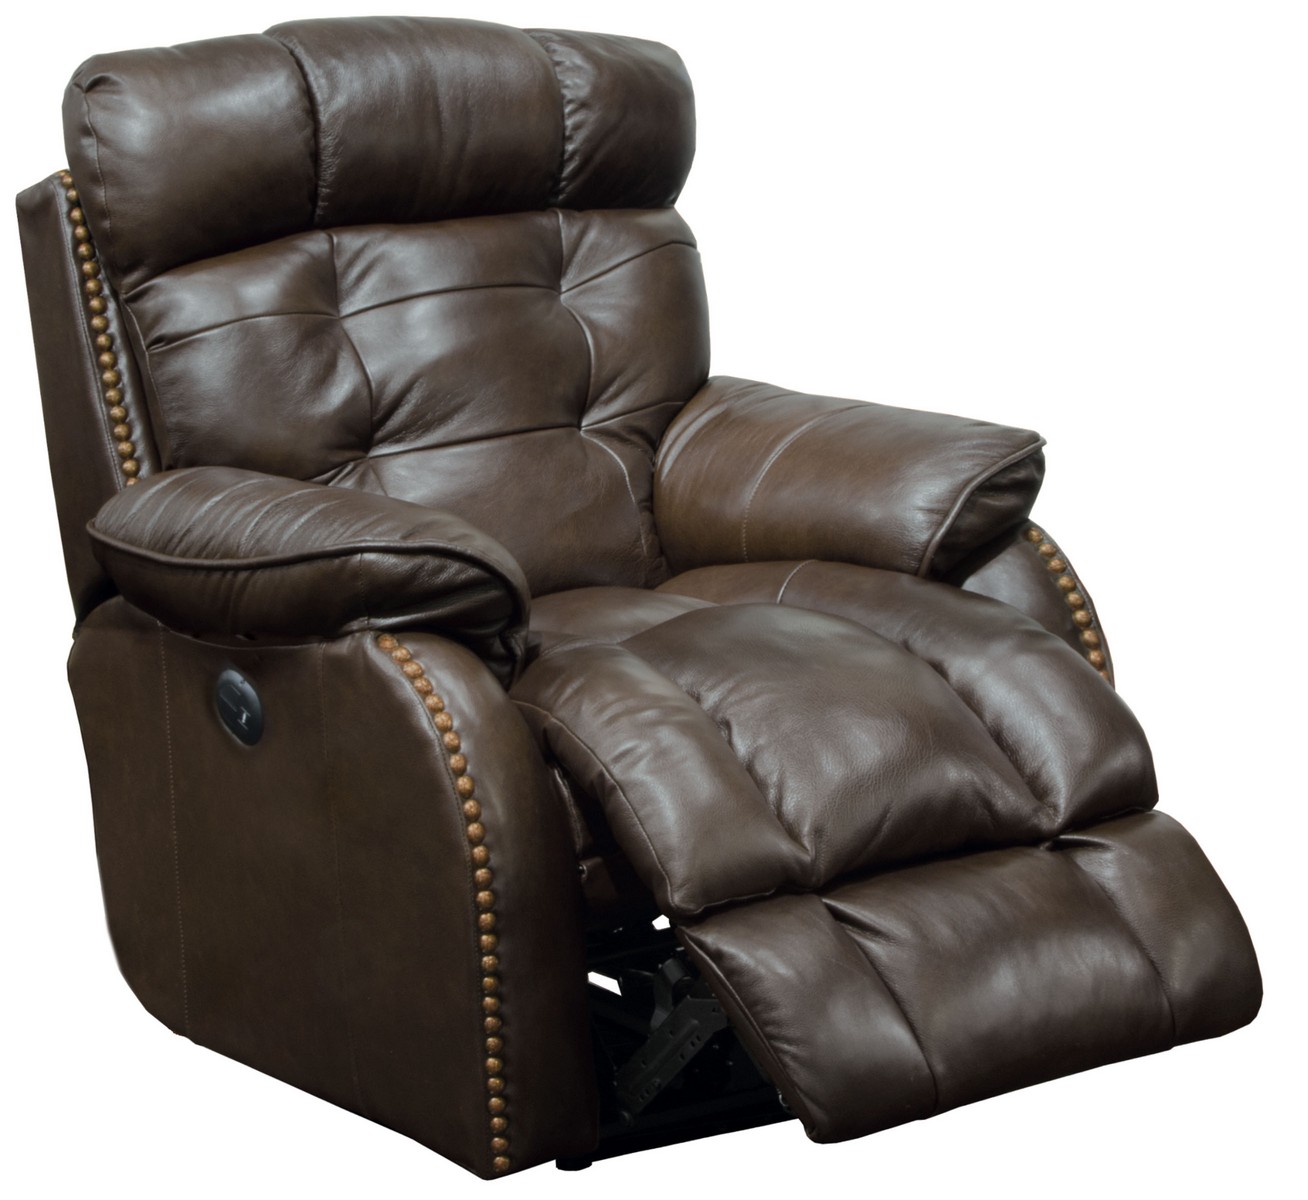 CatNapper Patterson Top Grain Leather Touch Power Lay Flat Recliner - Chocolate